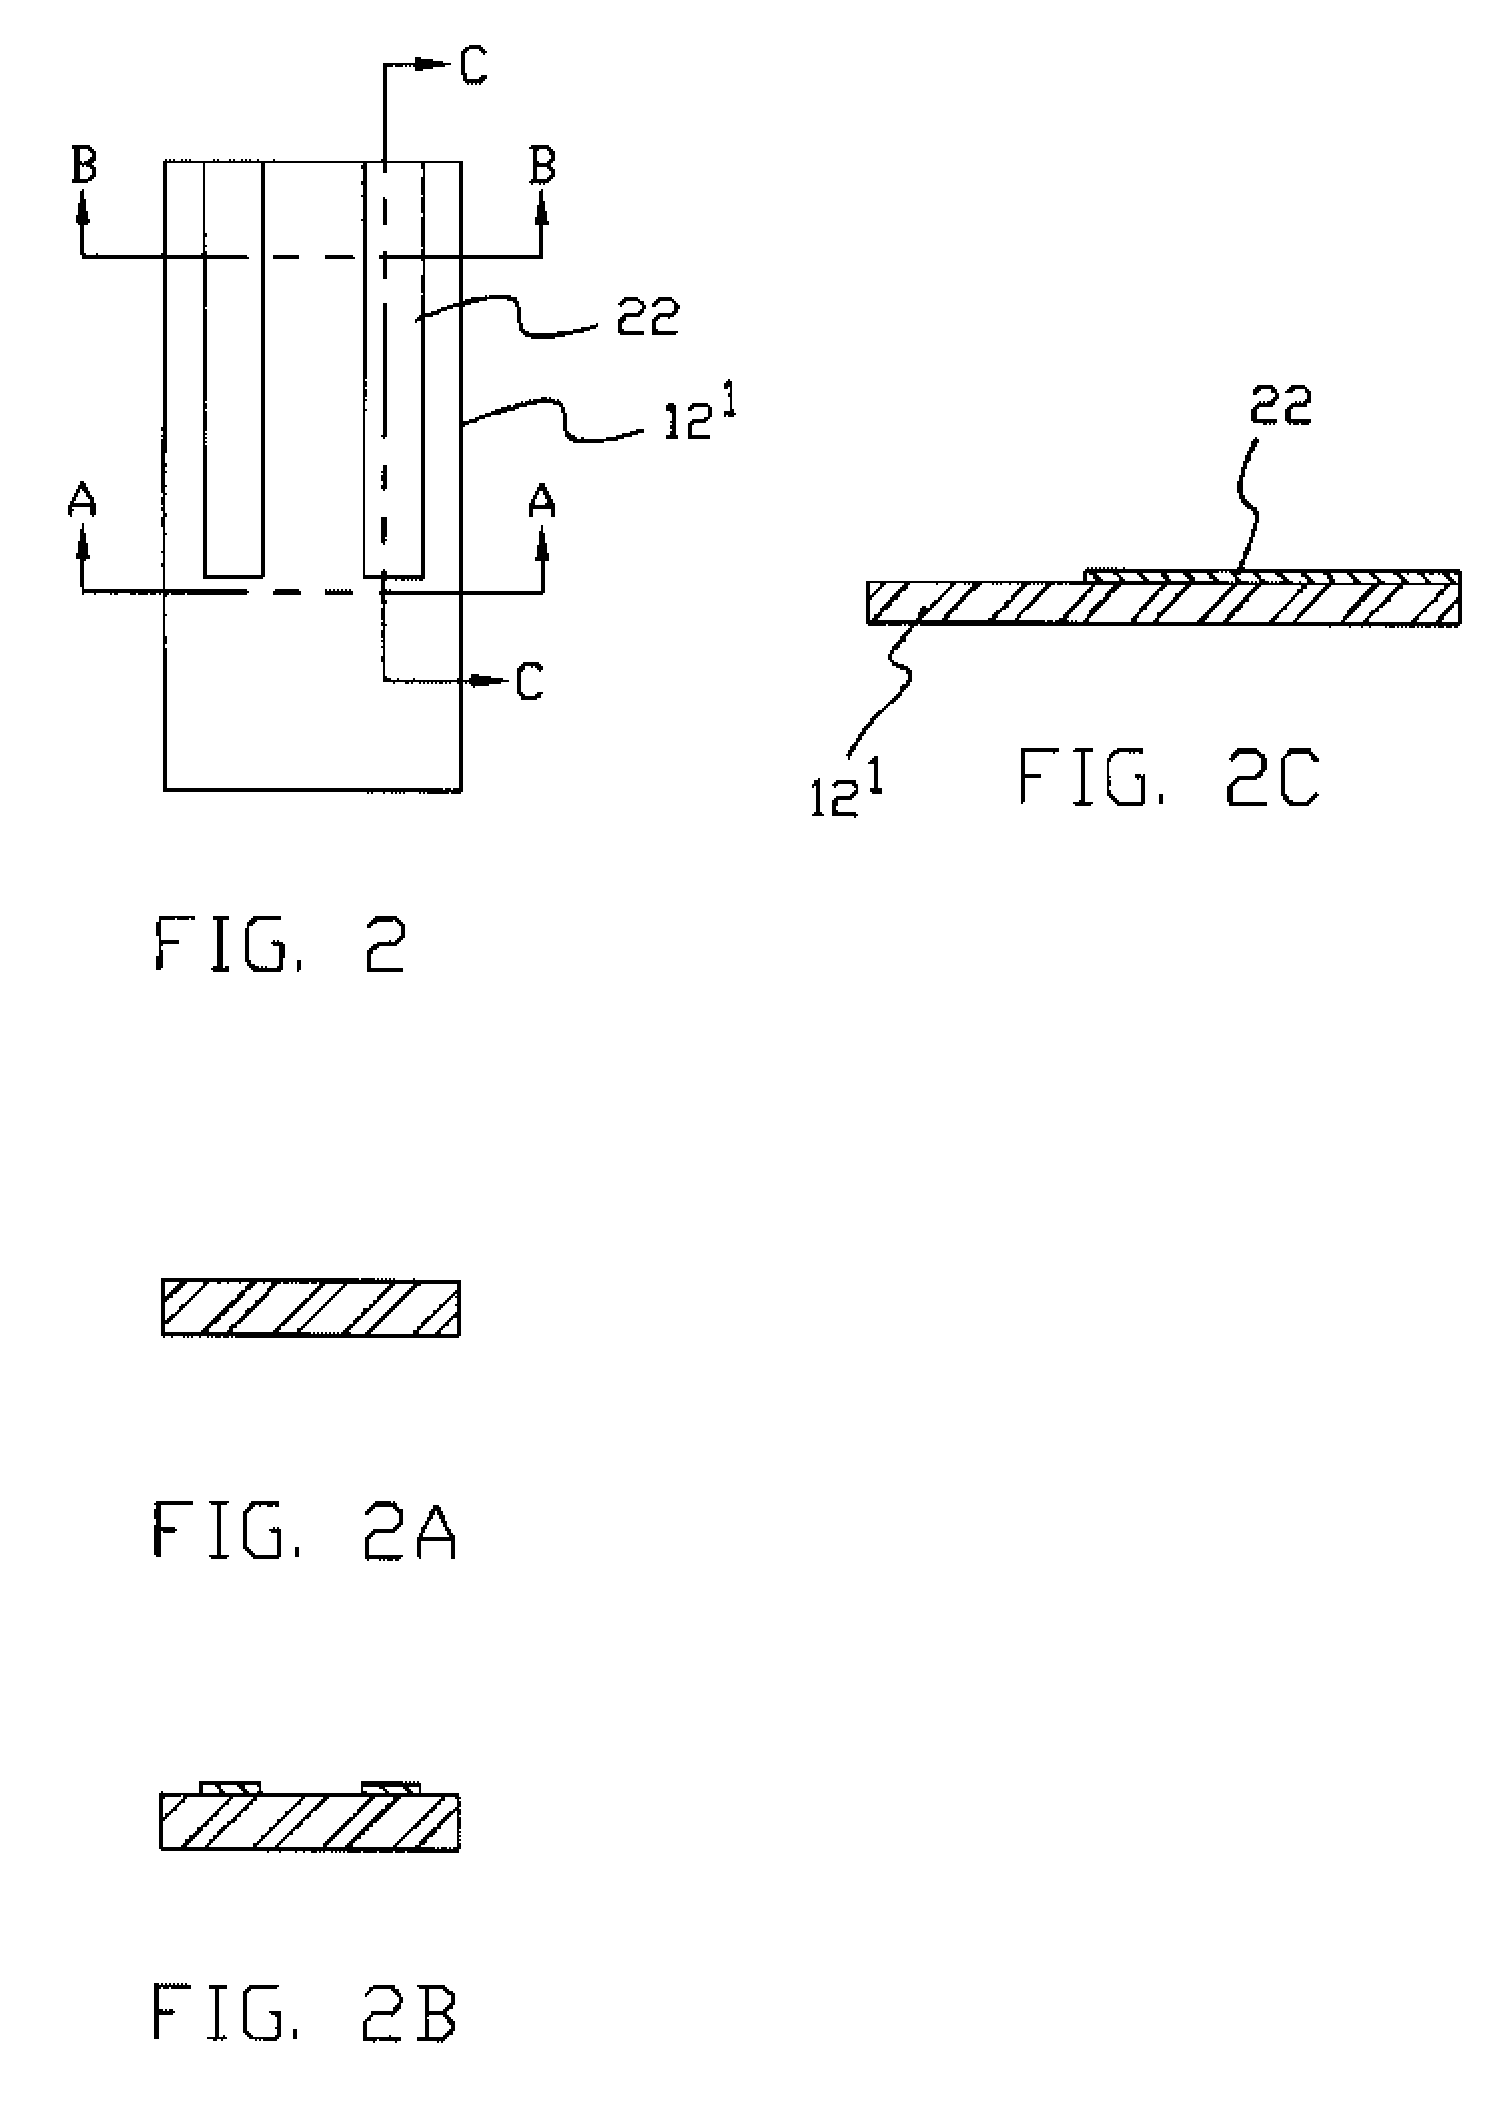 Multi-layer ground plane structures for integrated lead suspensions